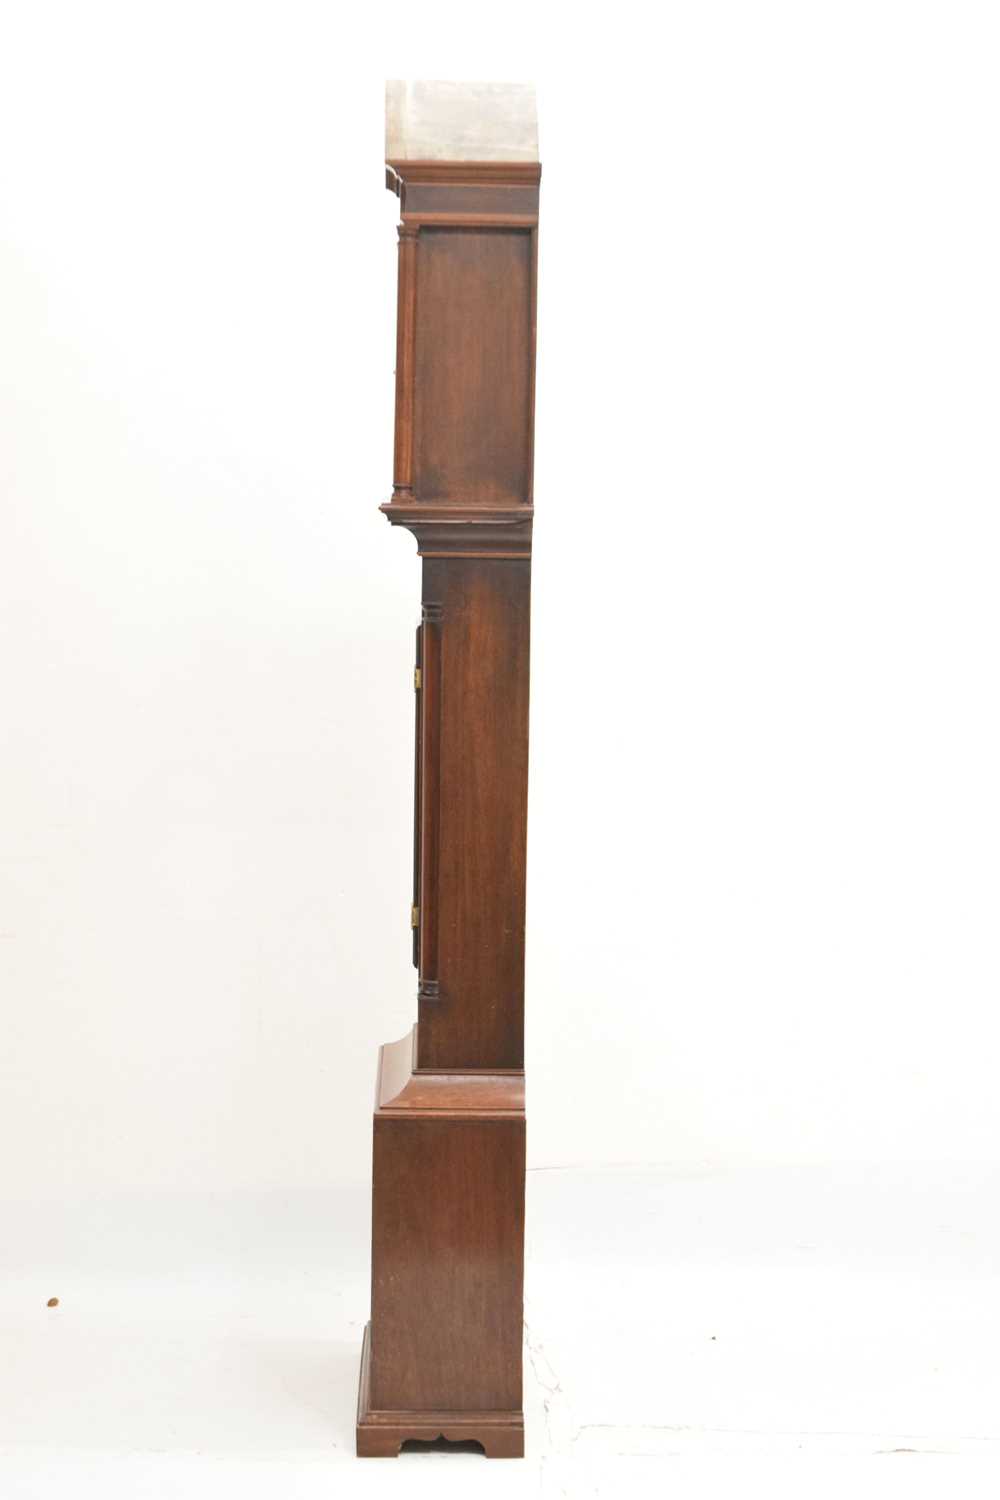 19th century mahogany longcase clock, A & Wm. Miller, Airdrie - Image 6 of 9